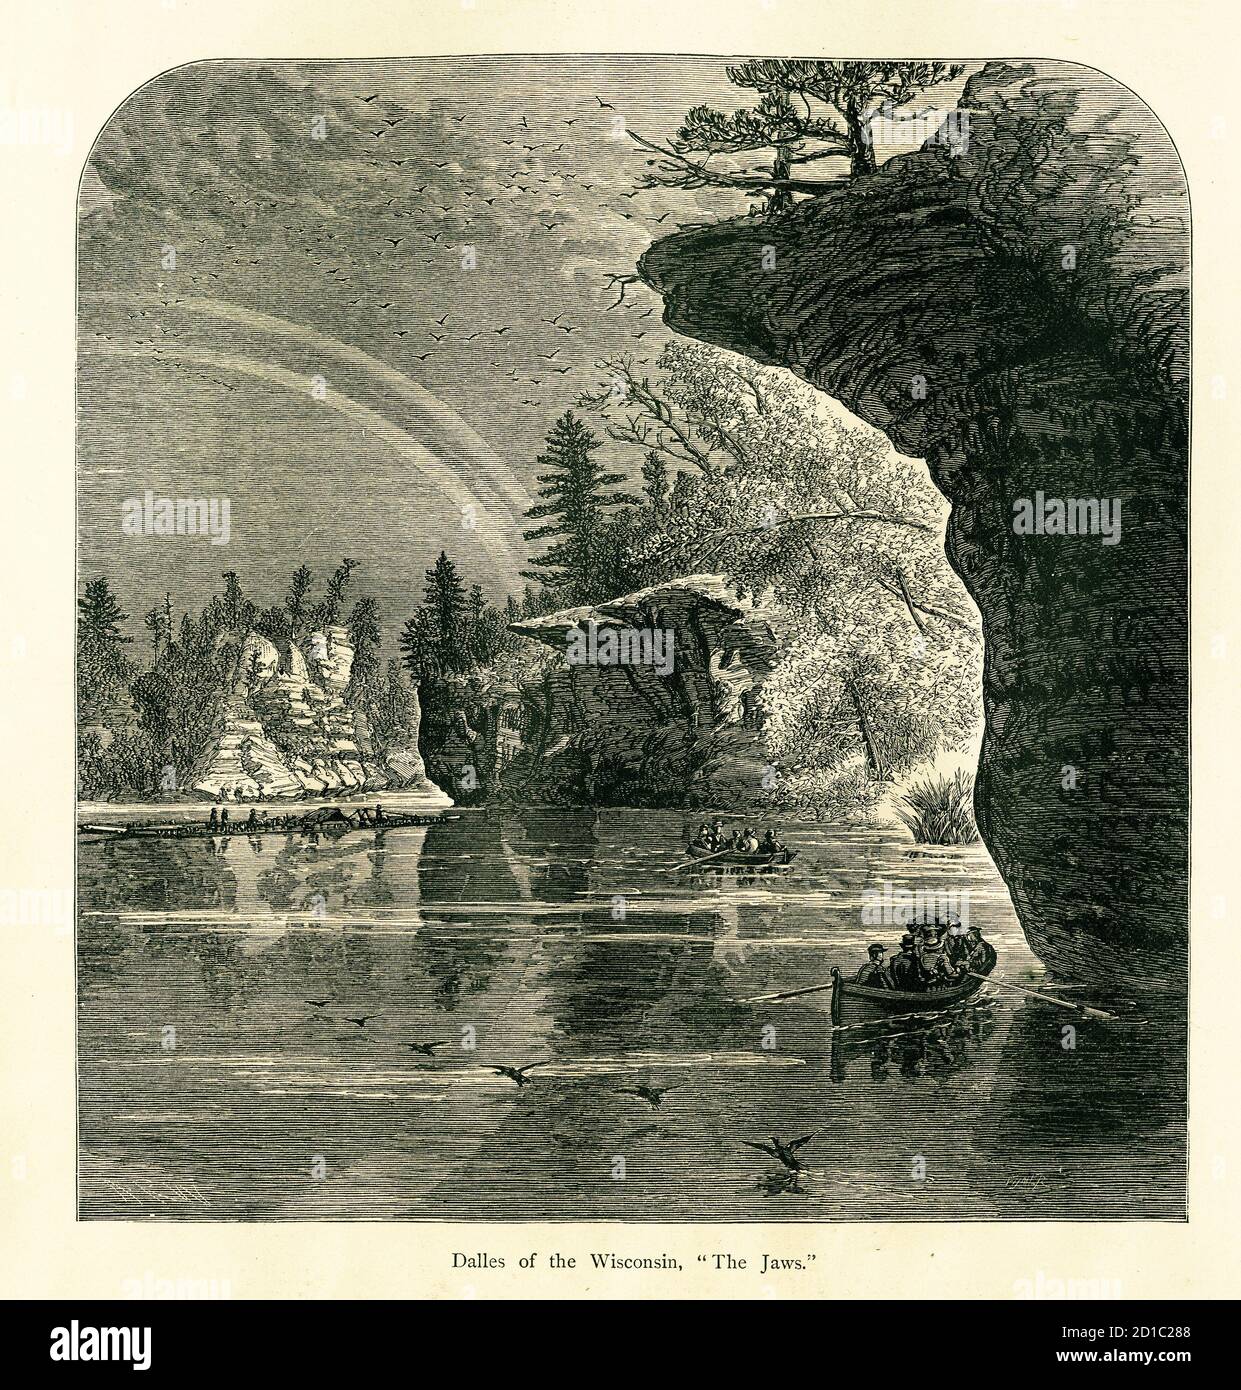 19th-century engraving of rapids in the Wisconsin River, USA. Illustration published in Picturesque America or the Land We Live In (D. Appleton & Co., Stock Photo